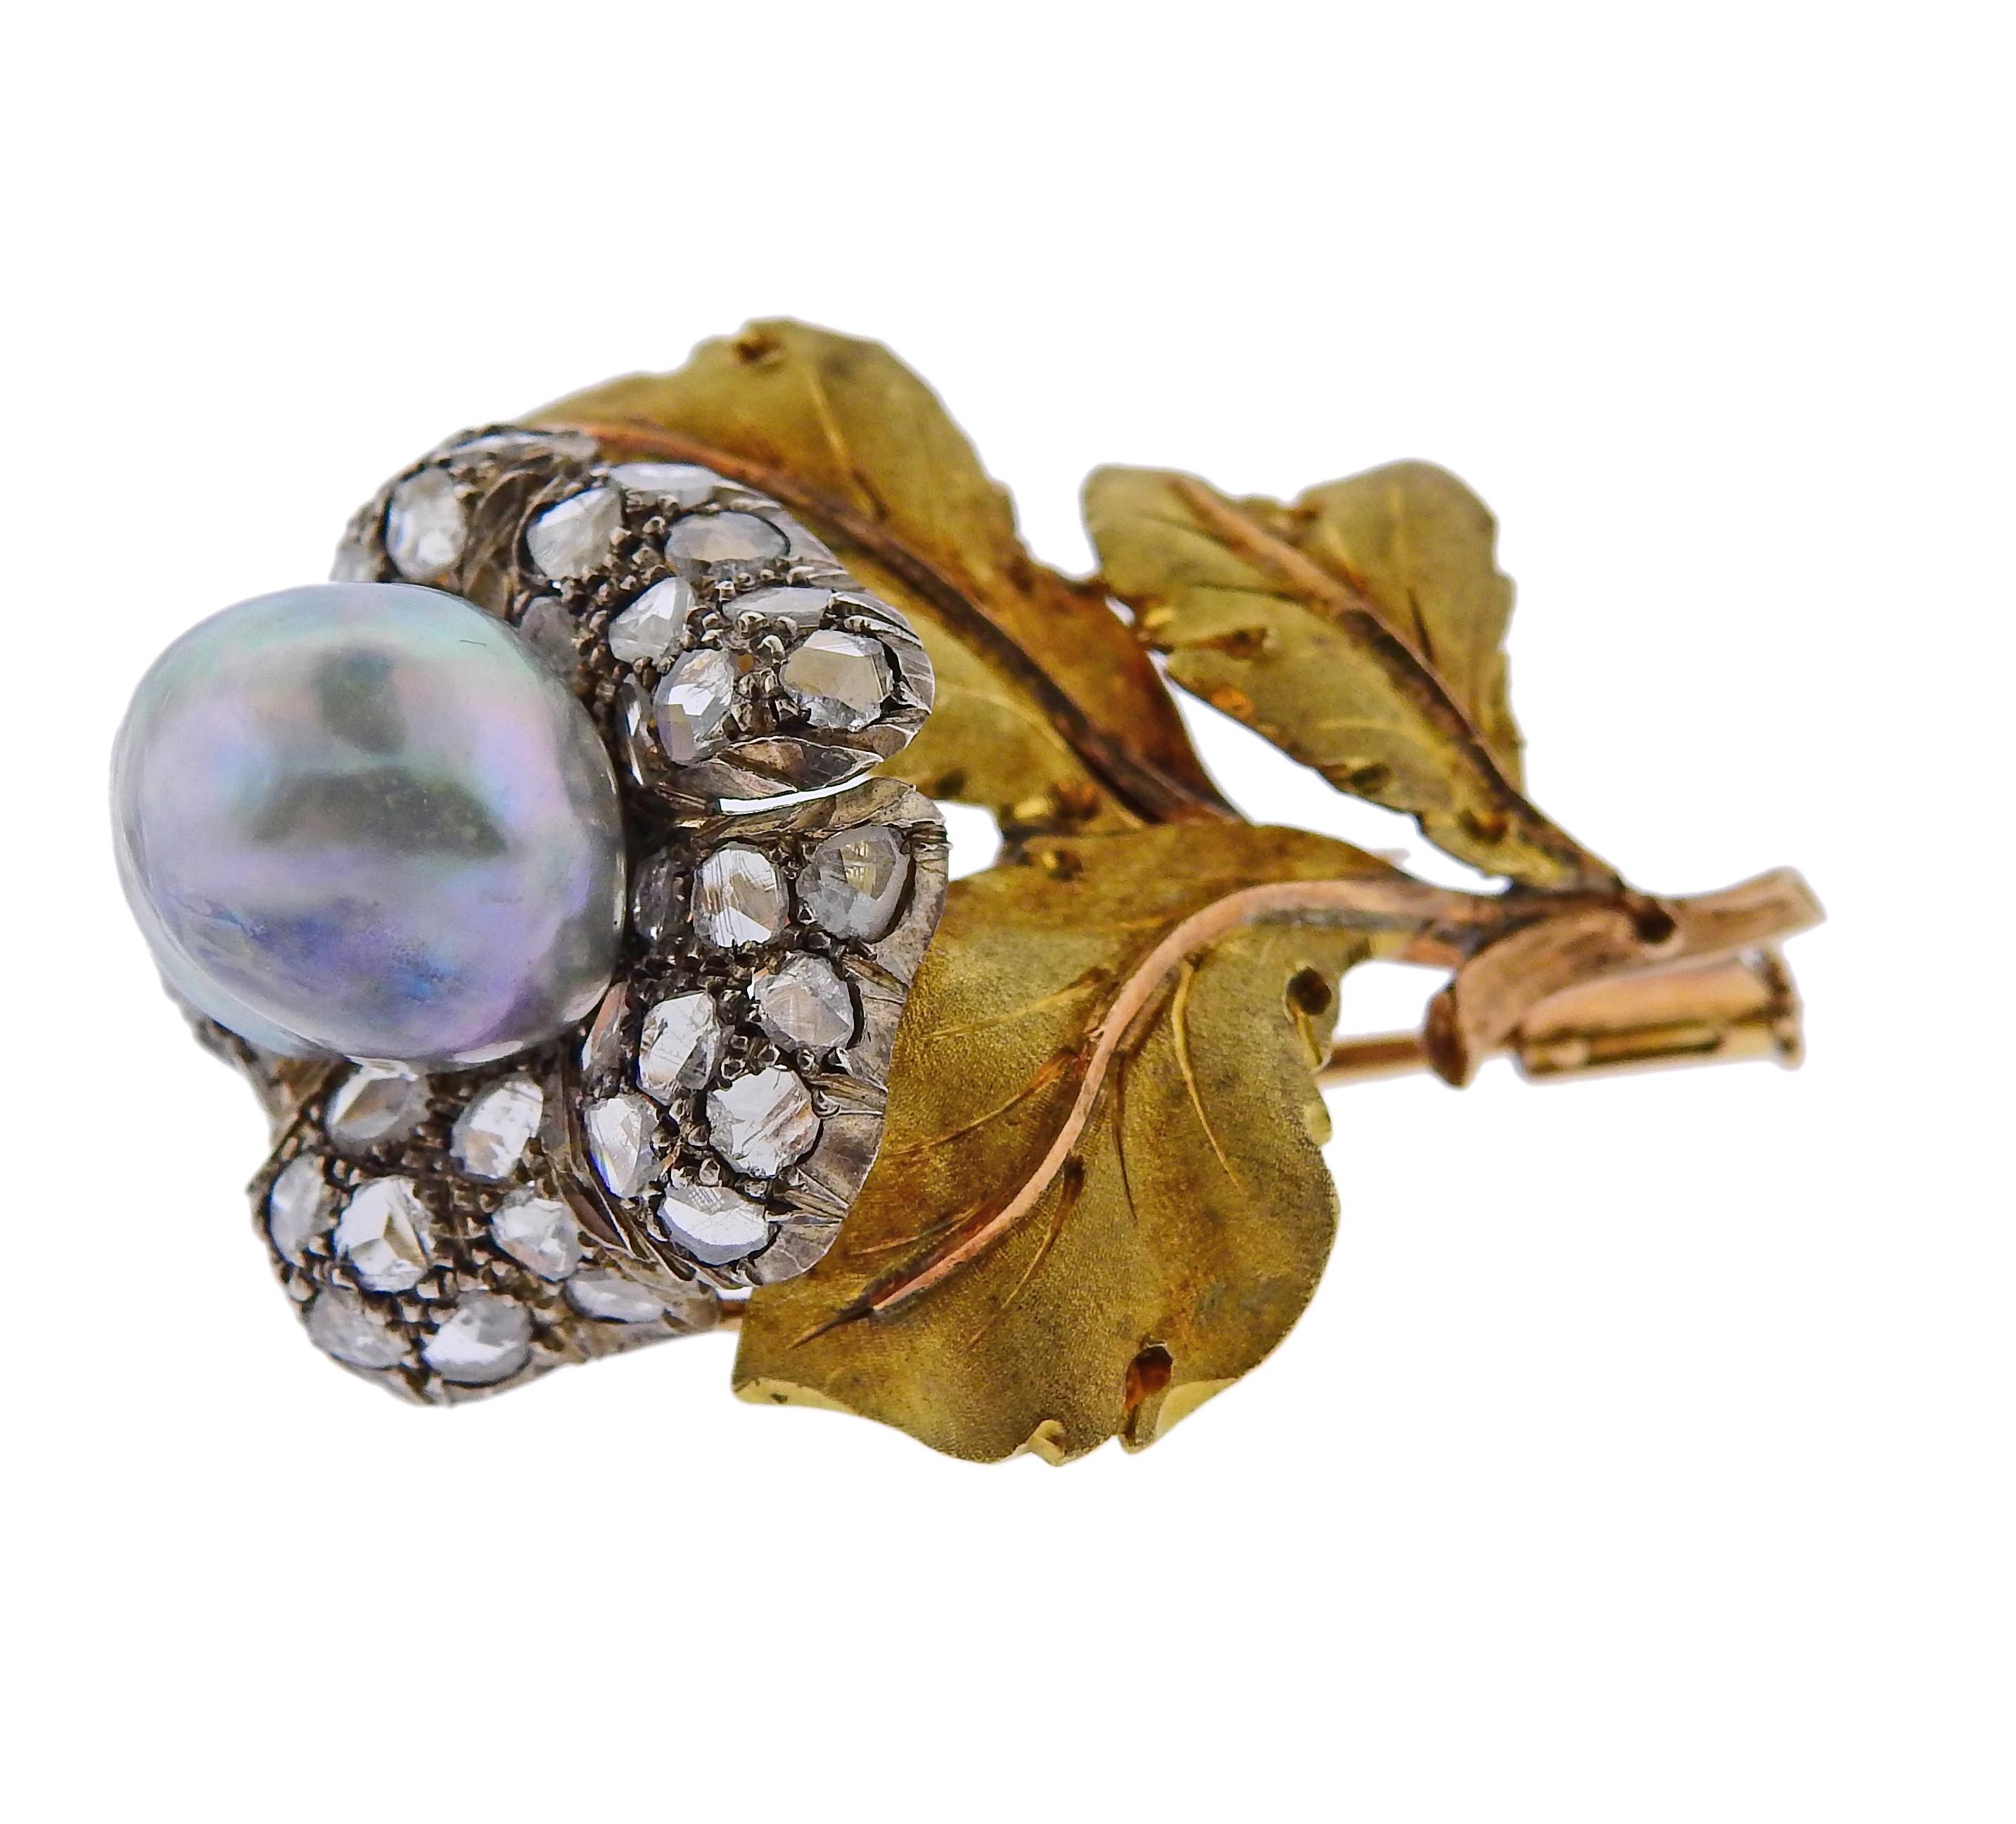 18k gold and silver brooch by Buccellati, set with rose cut diamonds and an approx. 12.5mm x 10.8mm pearl.  Brooch is 44mm x 32mm and weighs 13 grams. Marked Buccellati.